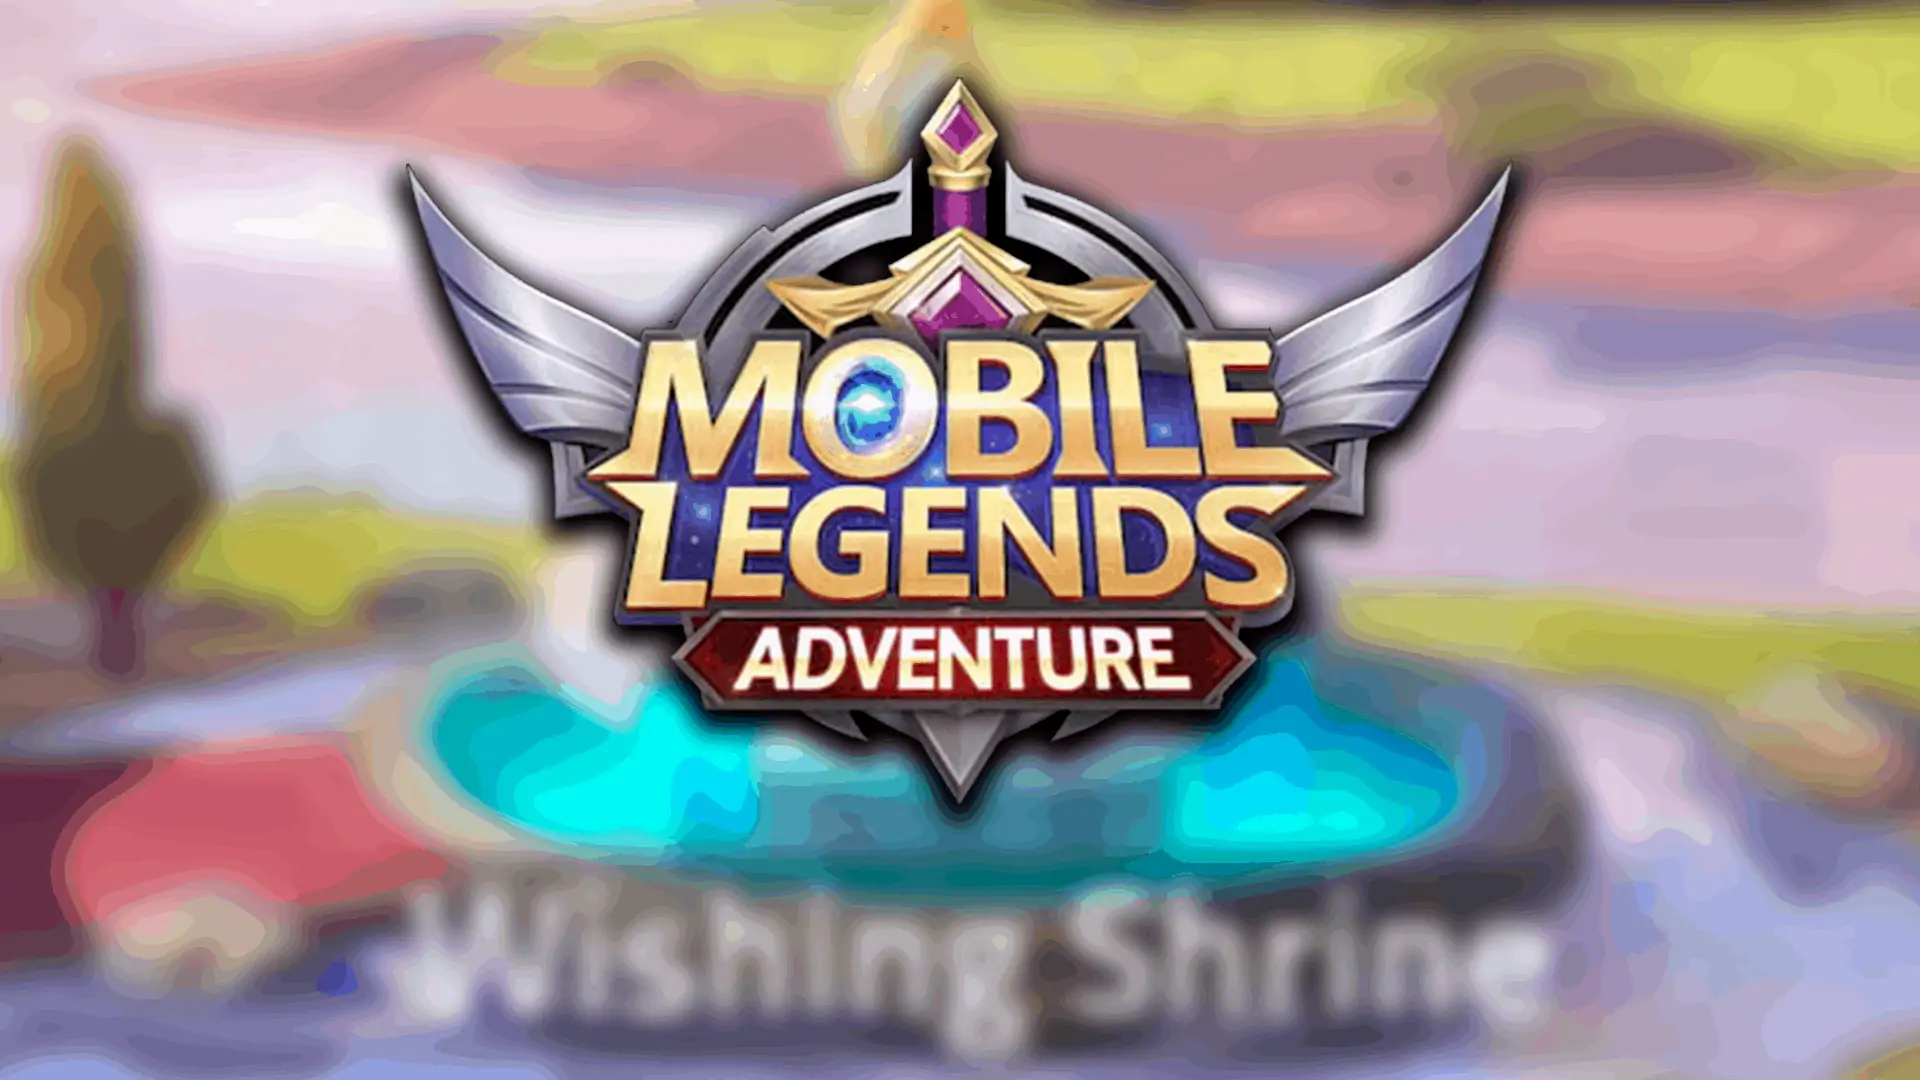 You are currently viewing Mobile Legends: Adventure – Wishing Shrine